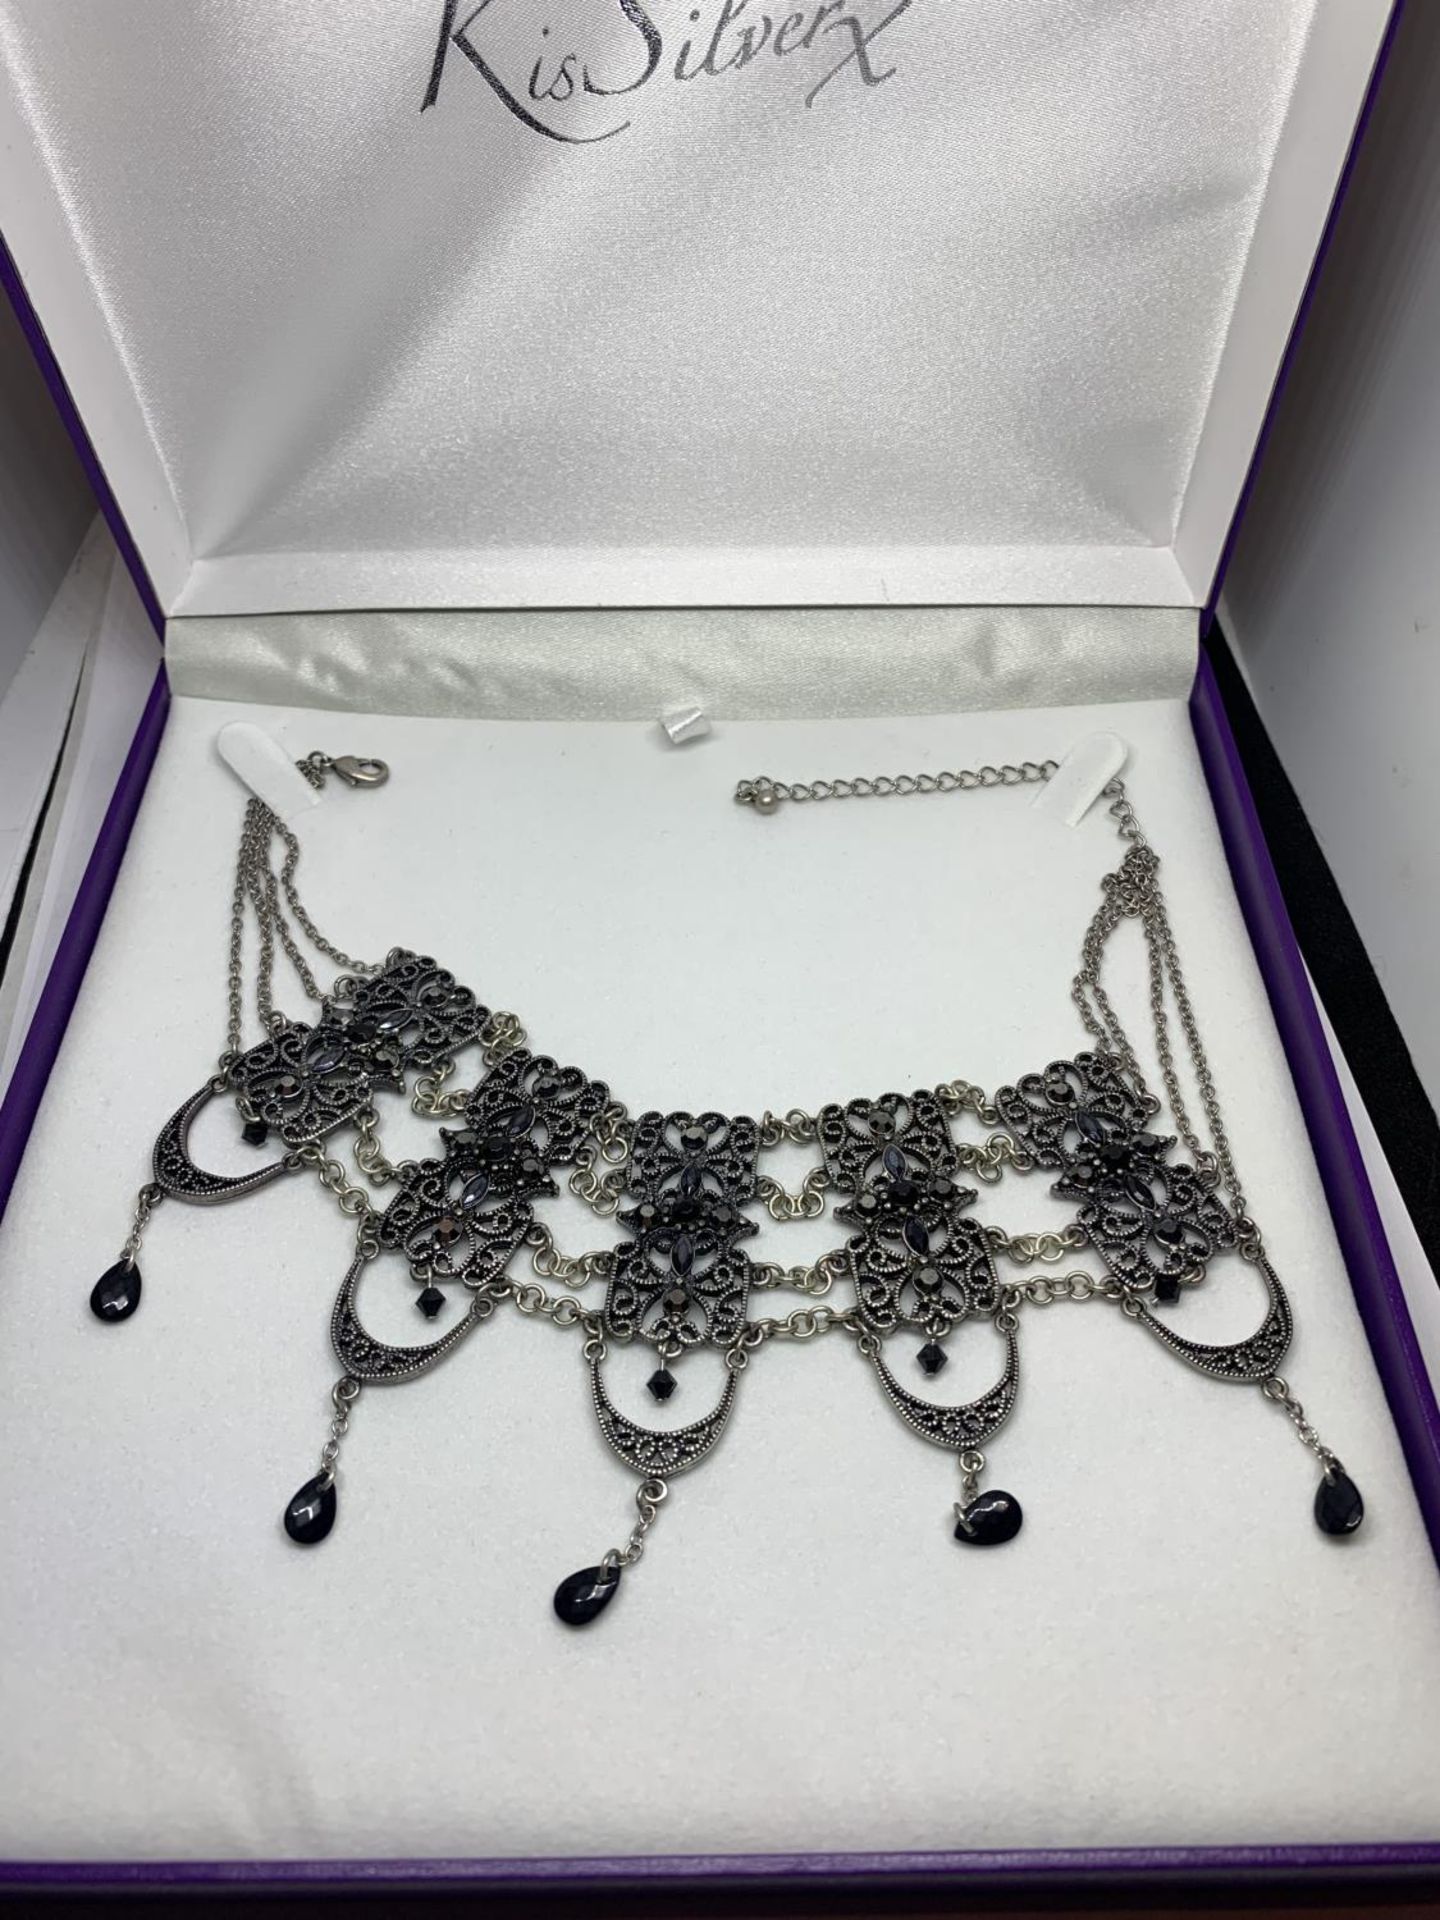 AN ART DECO NECKLACE IN A PRESENTATION BOX